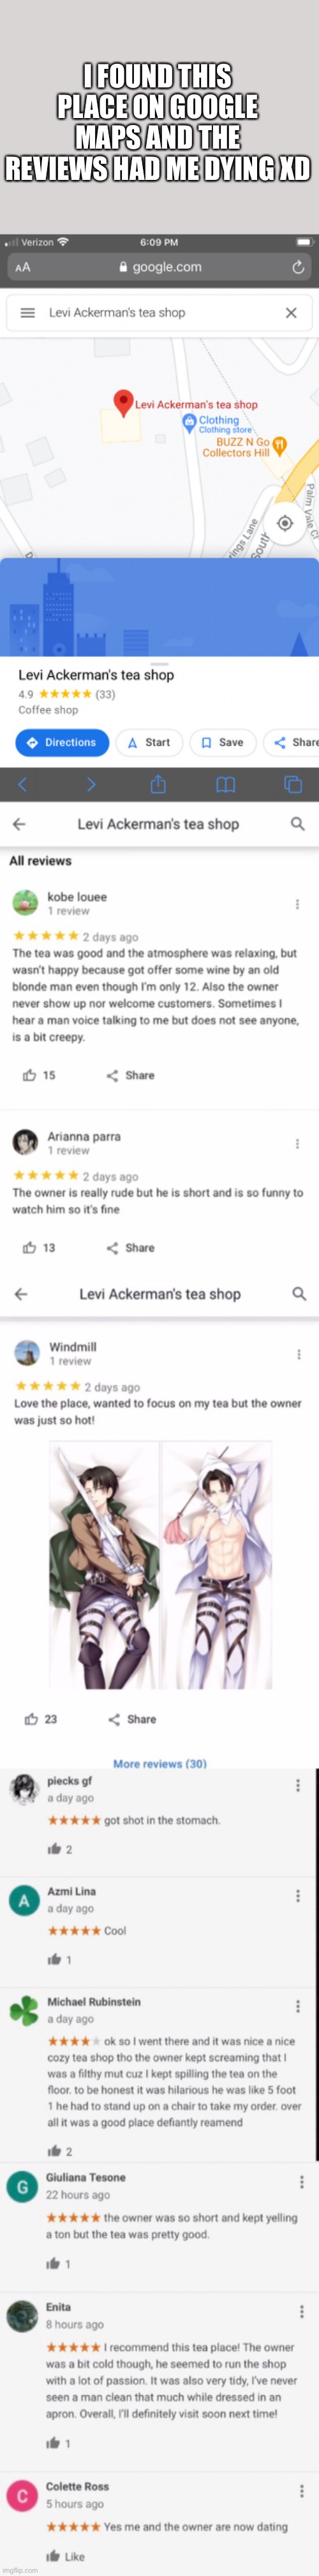 If you don’t believe me go look it up it’s in Bermuda | I FOUND THIS PLACE ON GOOGLE MAPS AND THE REVIEWS HAD ME DYING XD | image tagged in google maps,anime,aot,attack on titan | made w/ Imgflip meme maker